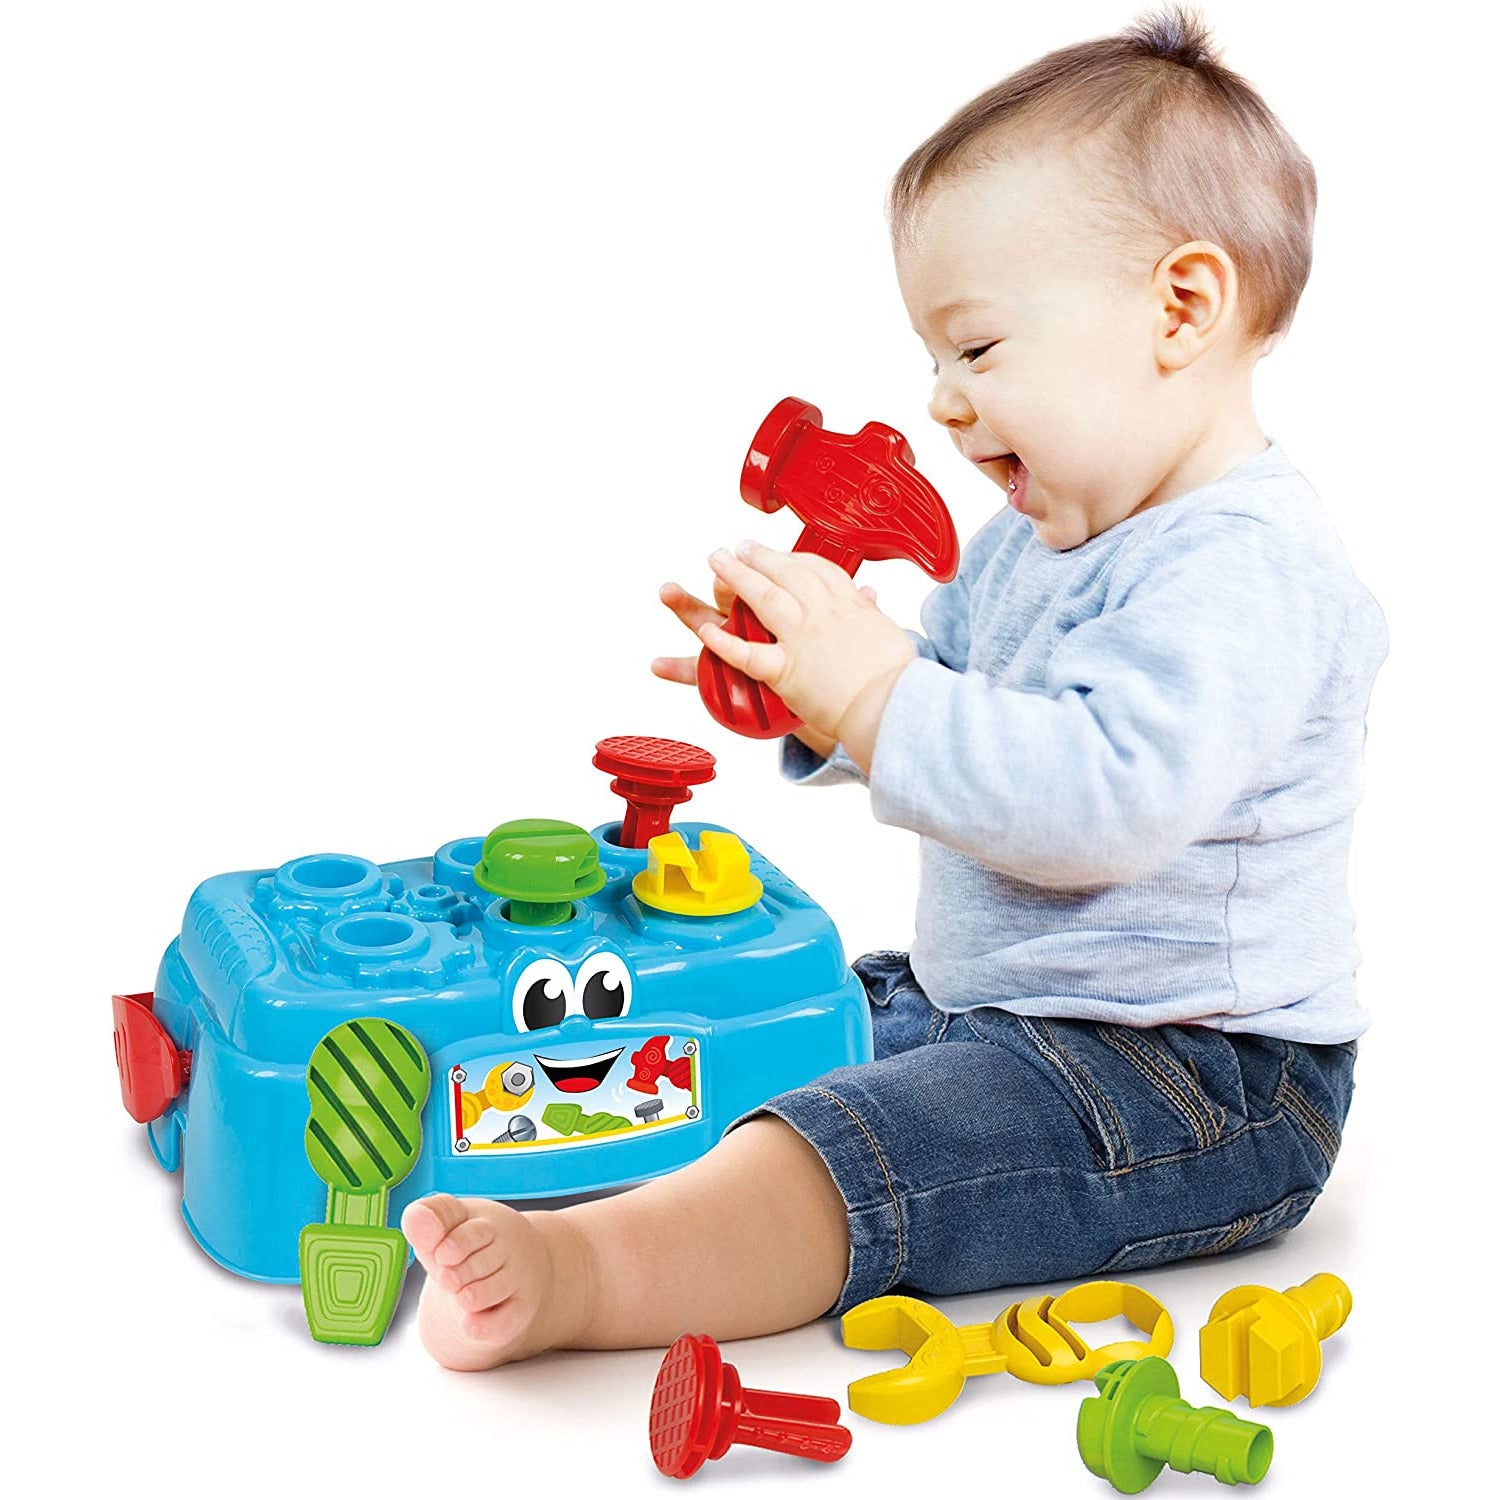 Baby Clementoni Educational Baby Toddler Toy My First Peekaboo